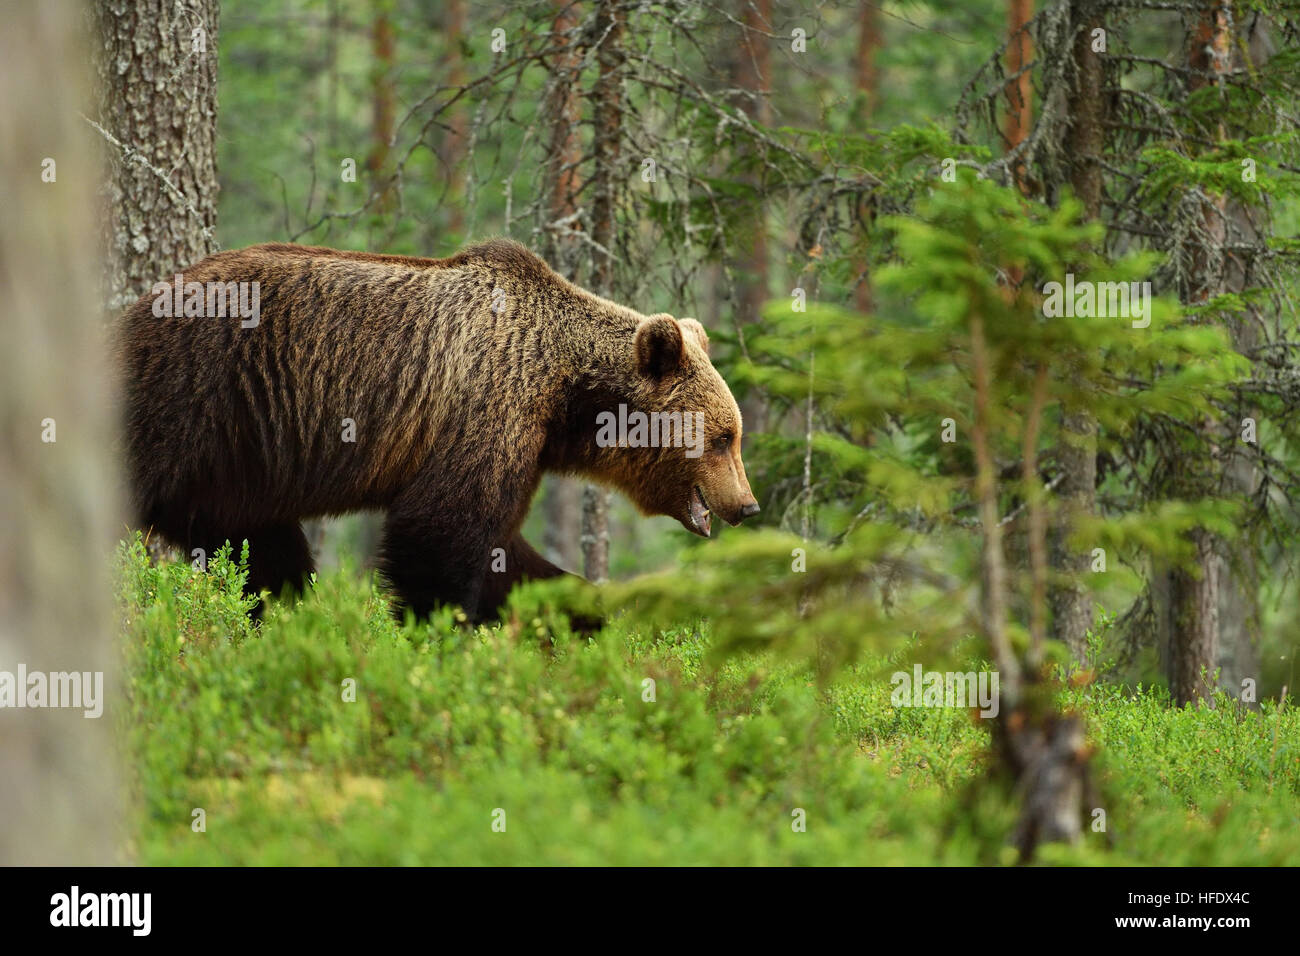 brown bear walking deep in a forest Stock Photo